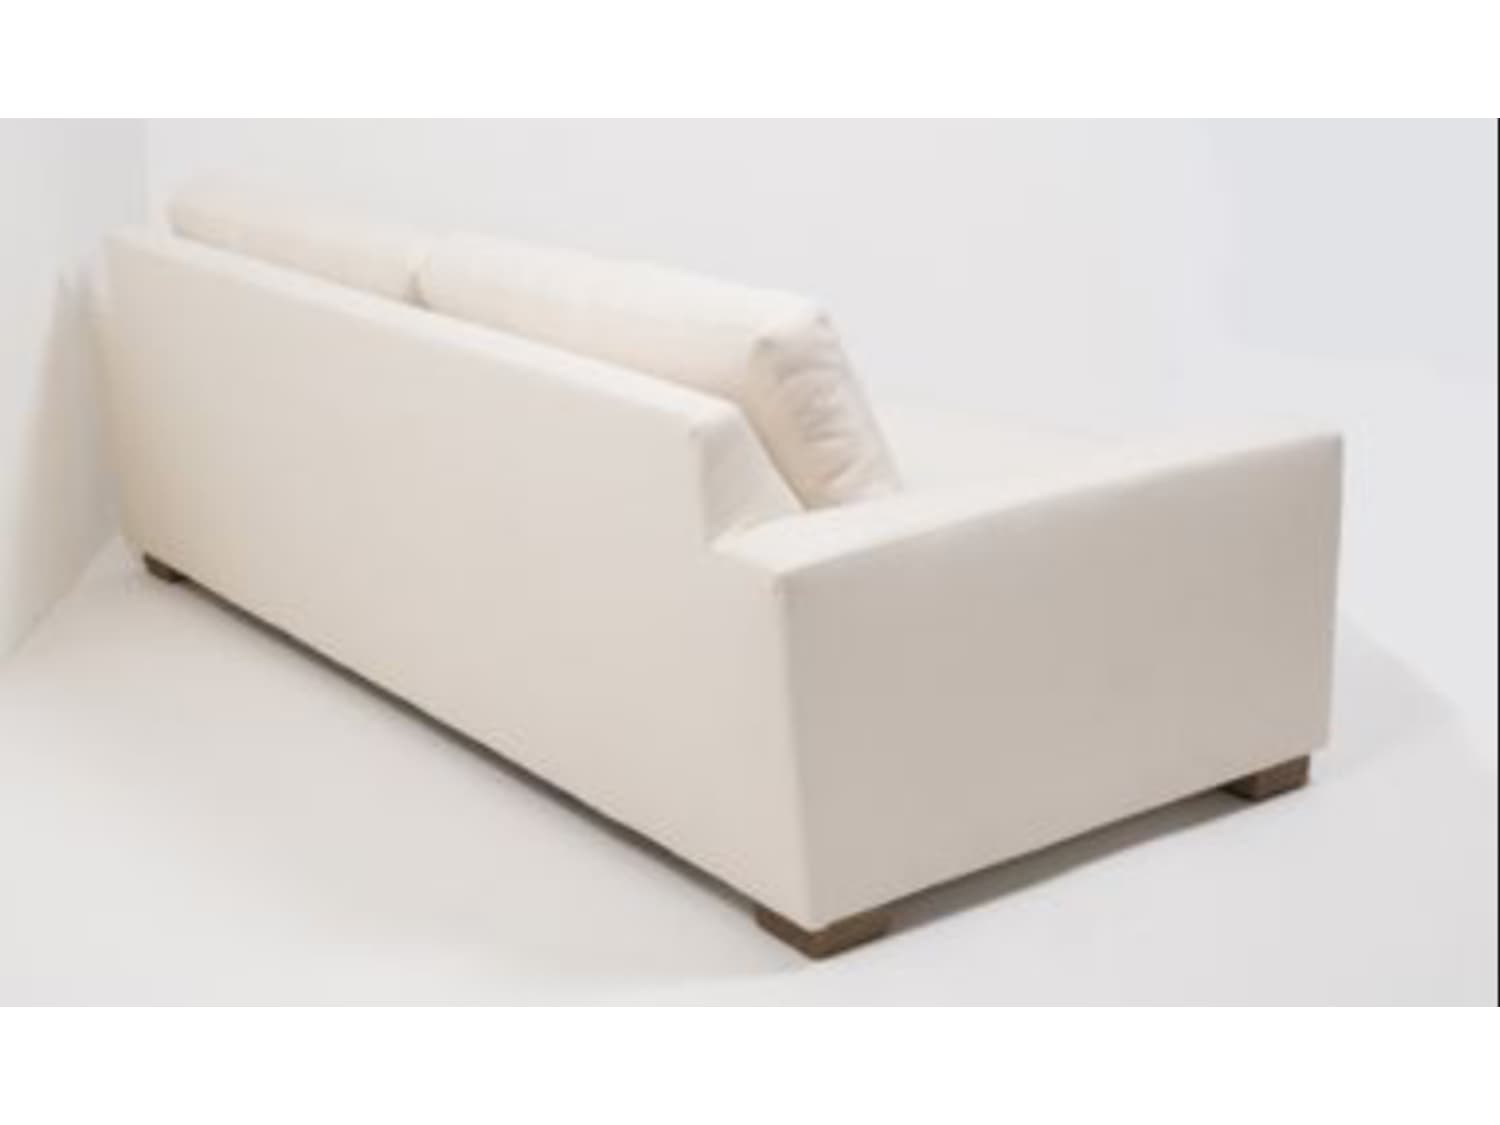 Unique Apartment Therapy Maxwell Sofa for Rent